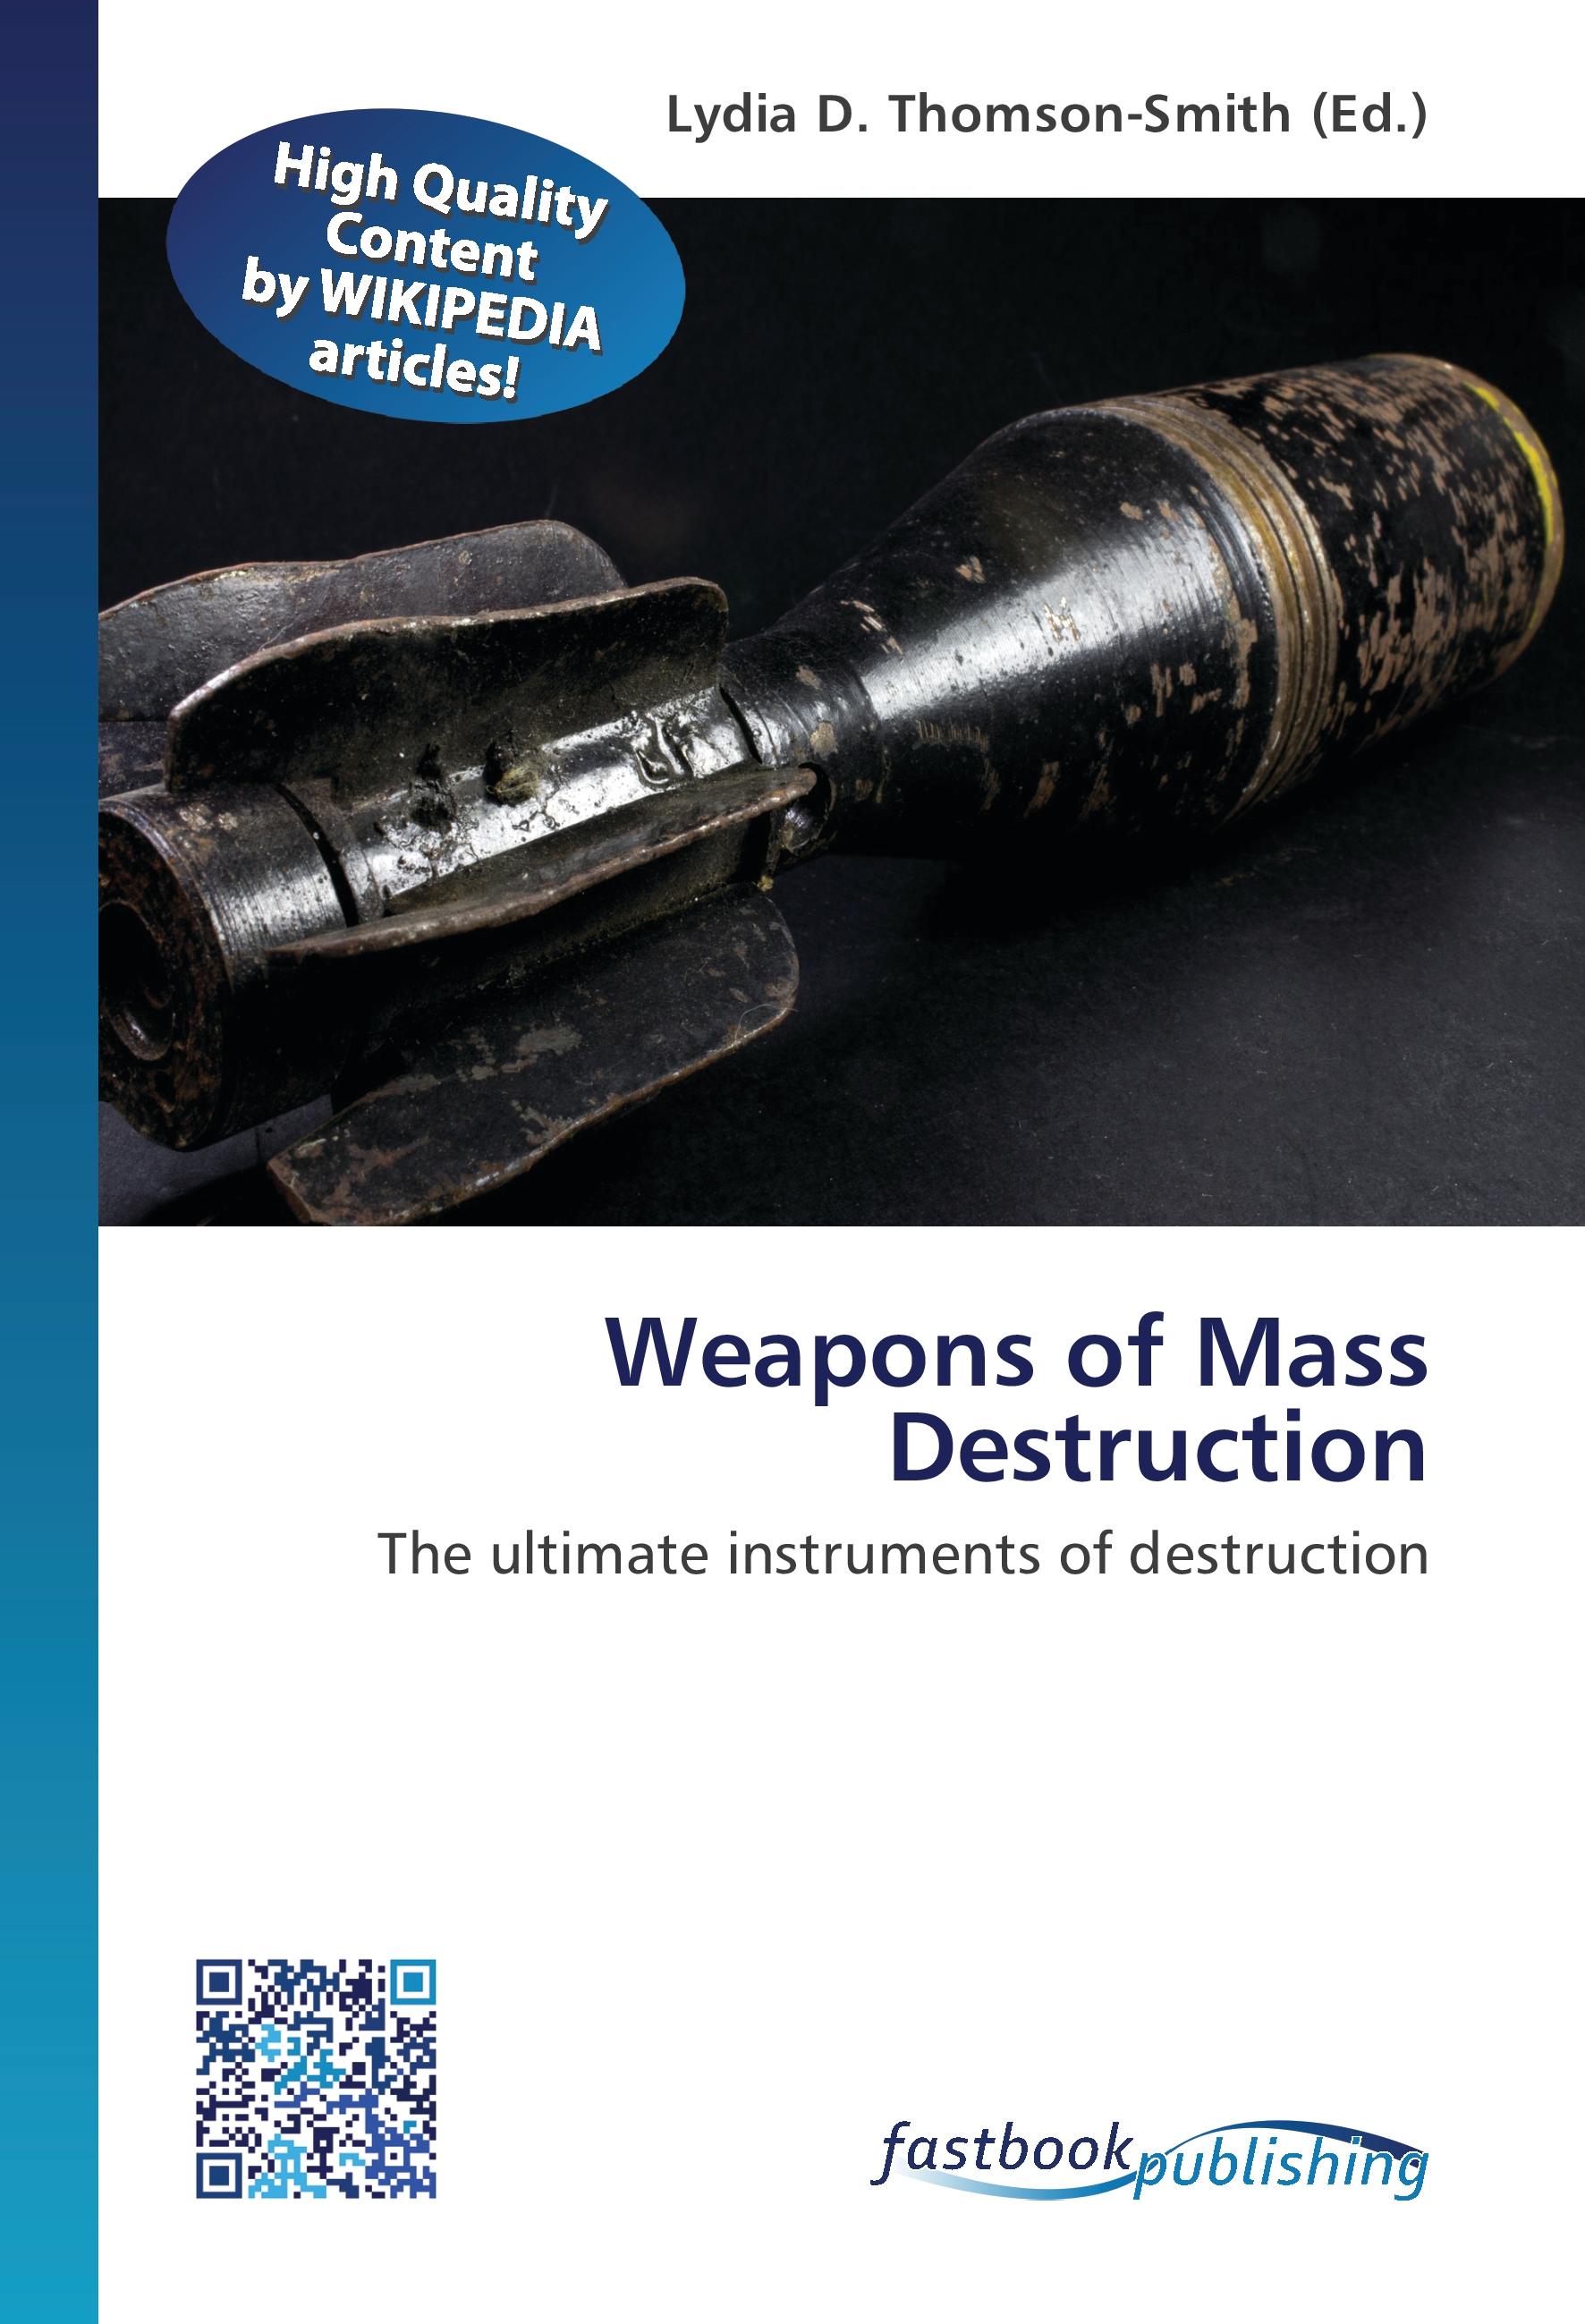 Weapons of Mass Destruction - Thomson-Smith, Lydia D.